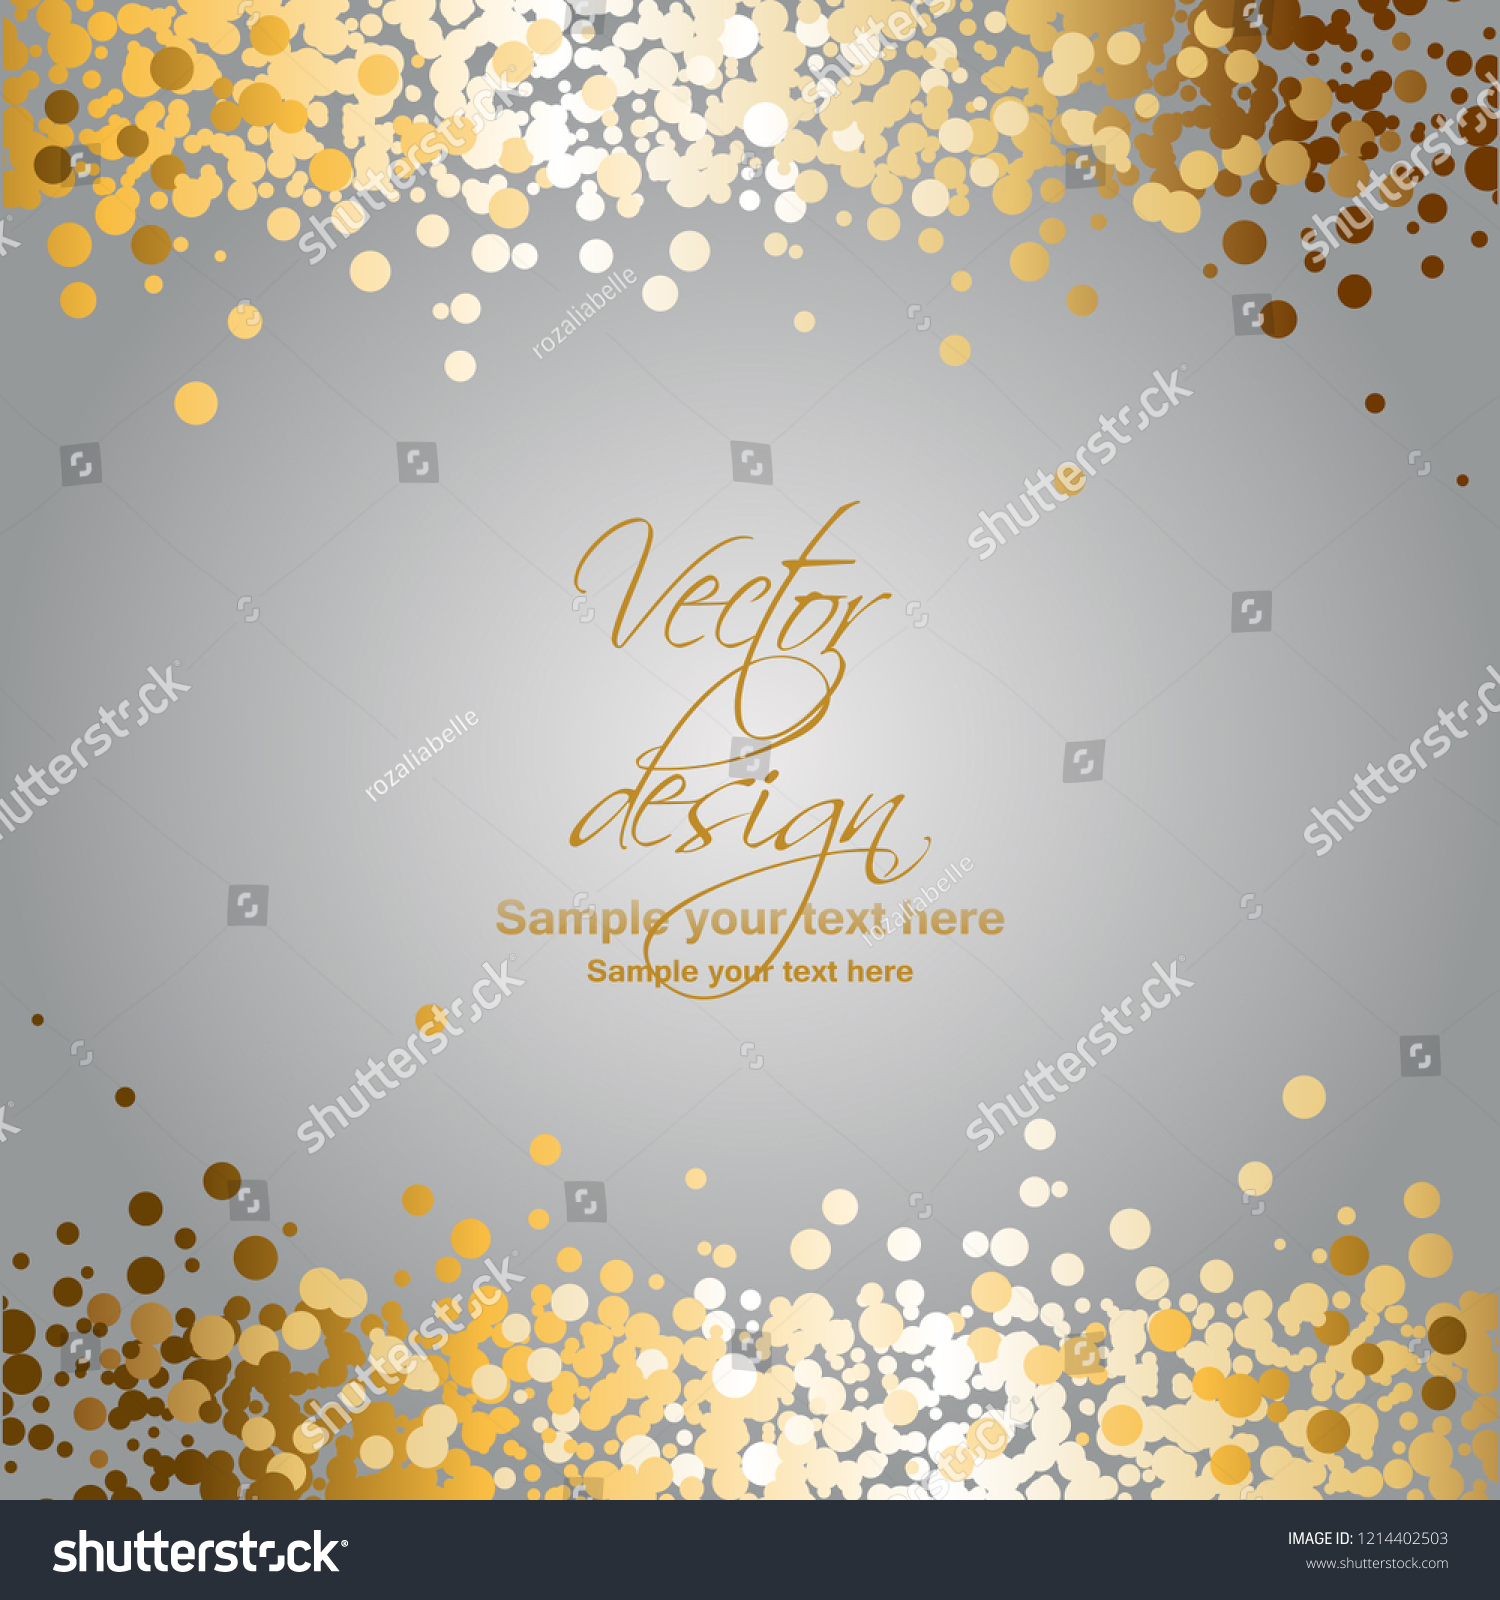 Vector illustration of Gold sparkles on a gray background #1214402503